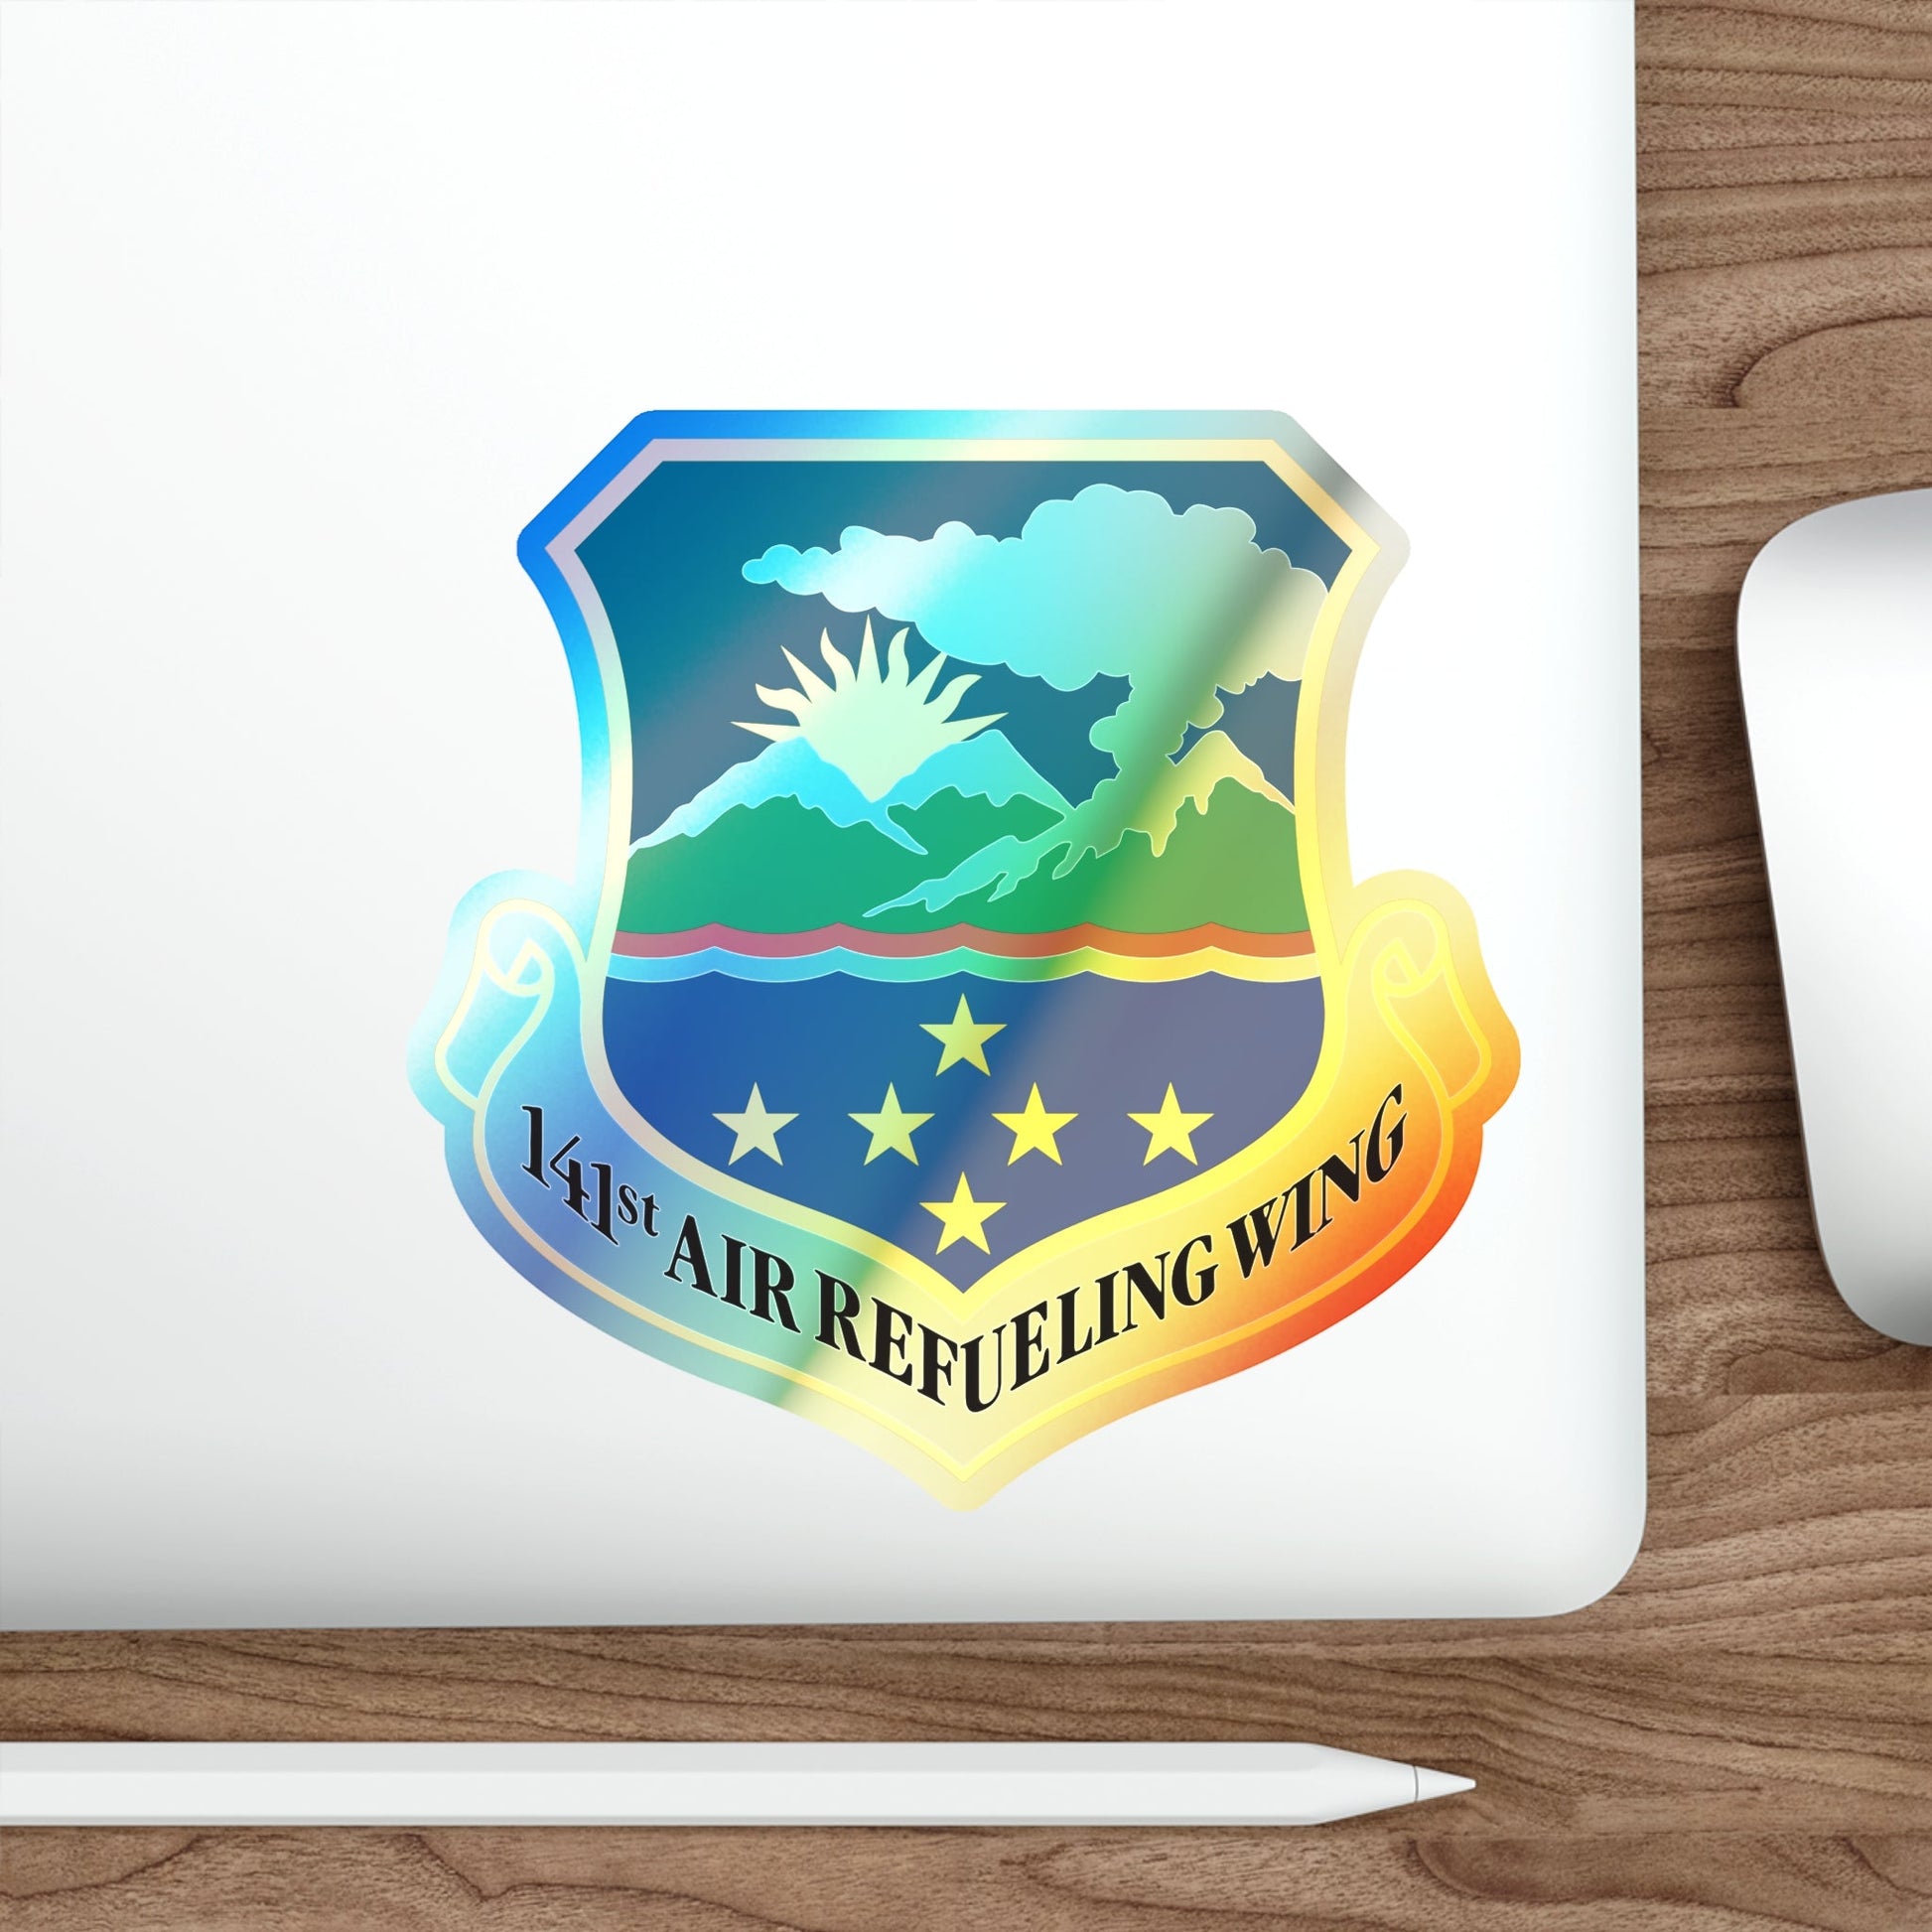 141st Air Refueling Wing (U.S. Air Force) Holographic STICKER Die-Cut Vinyl Decal-The Sticker Space